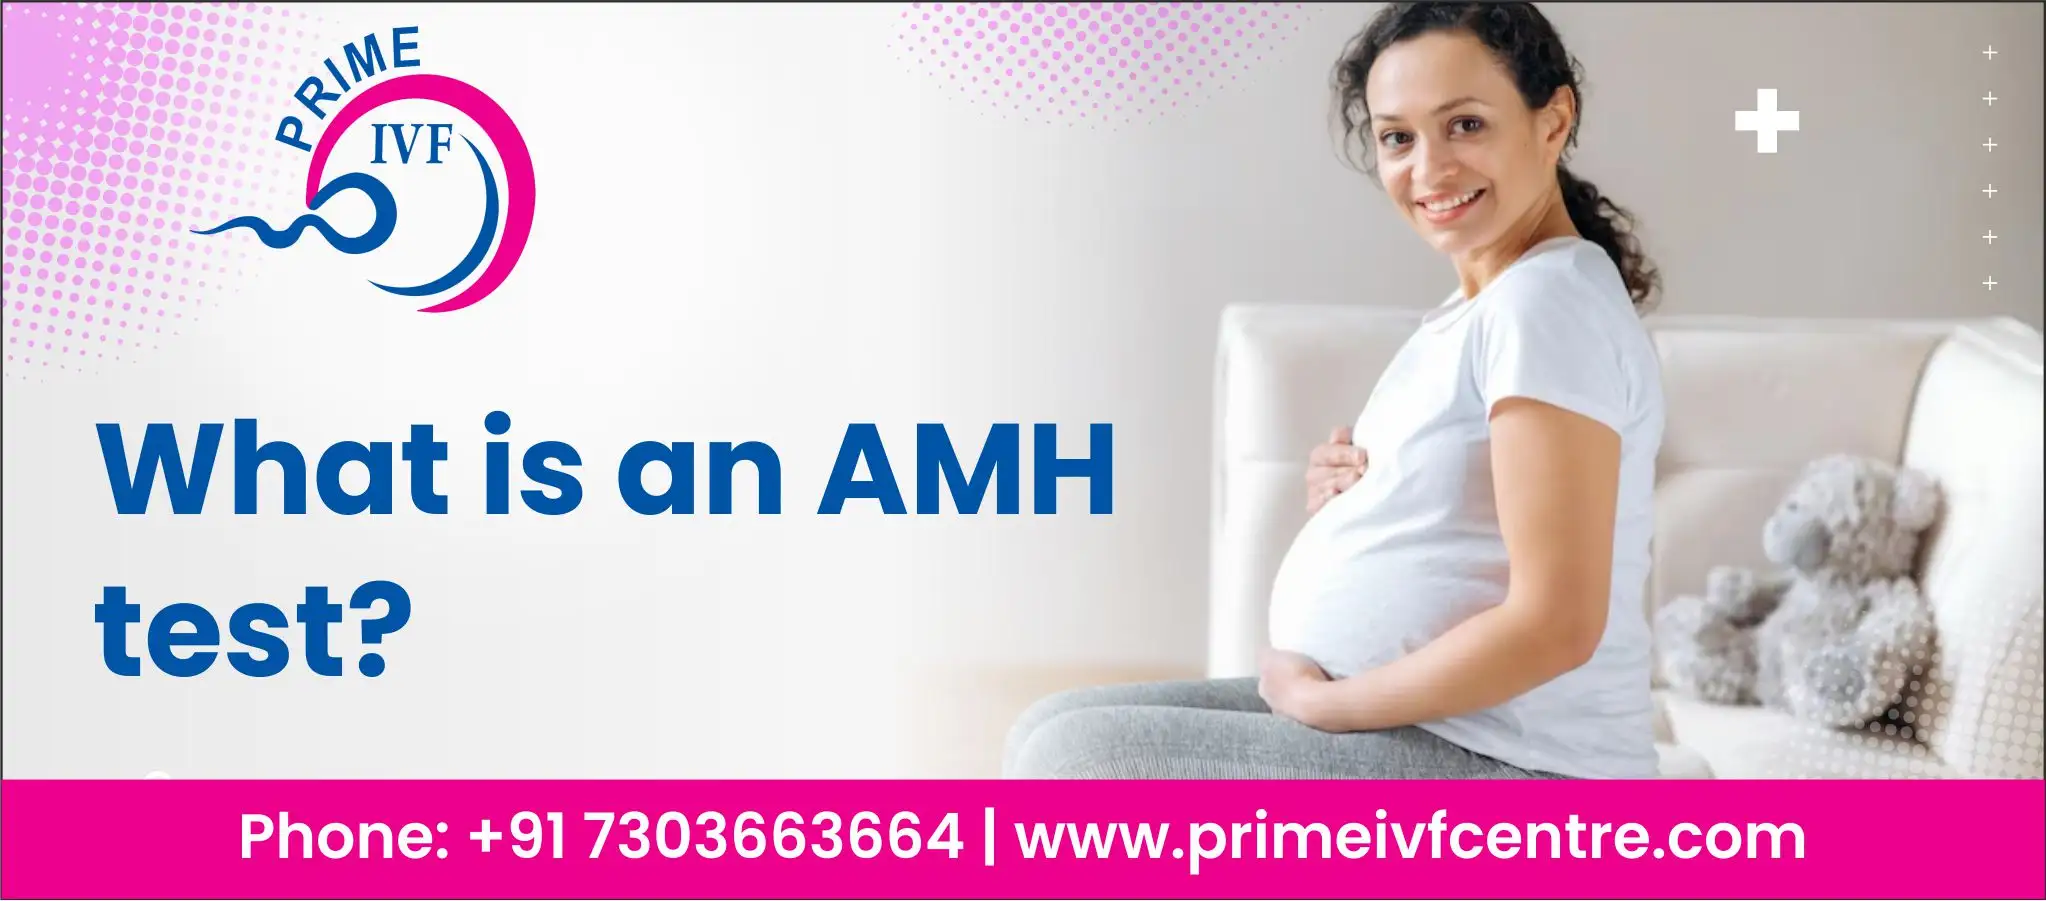 What is an AMH test?